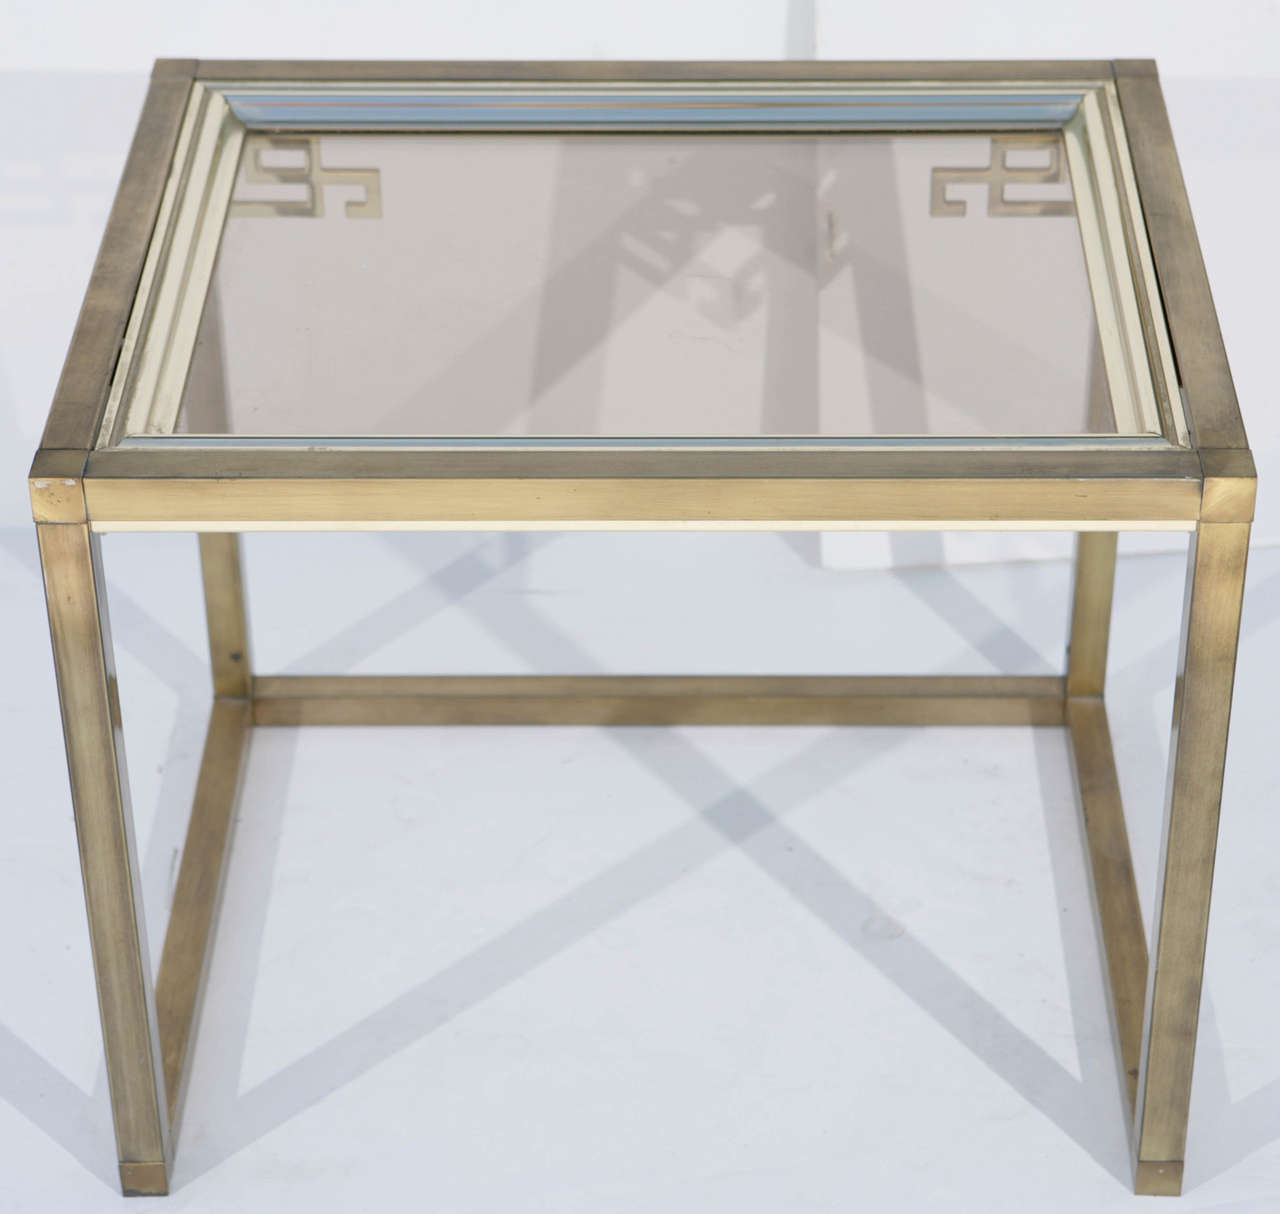 Neoclassical rectangular brass table with glass top and Greek key corner brackets